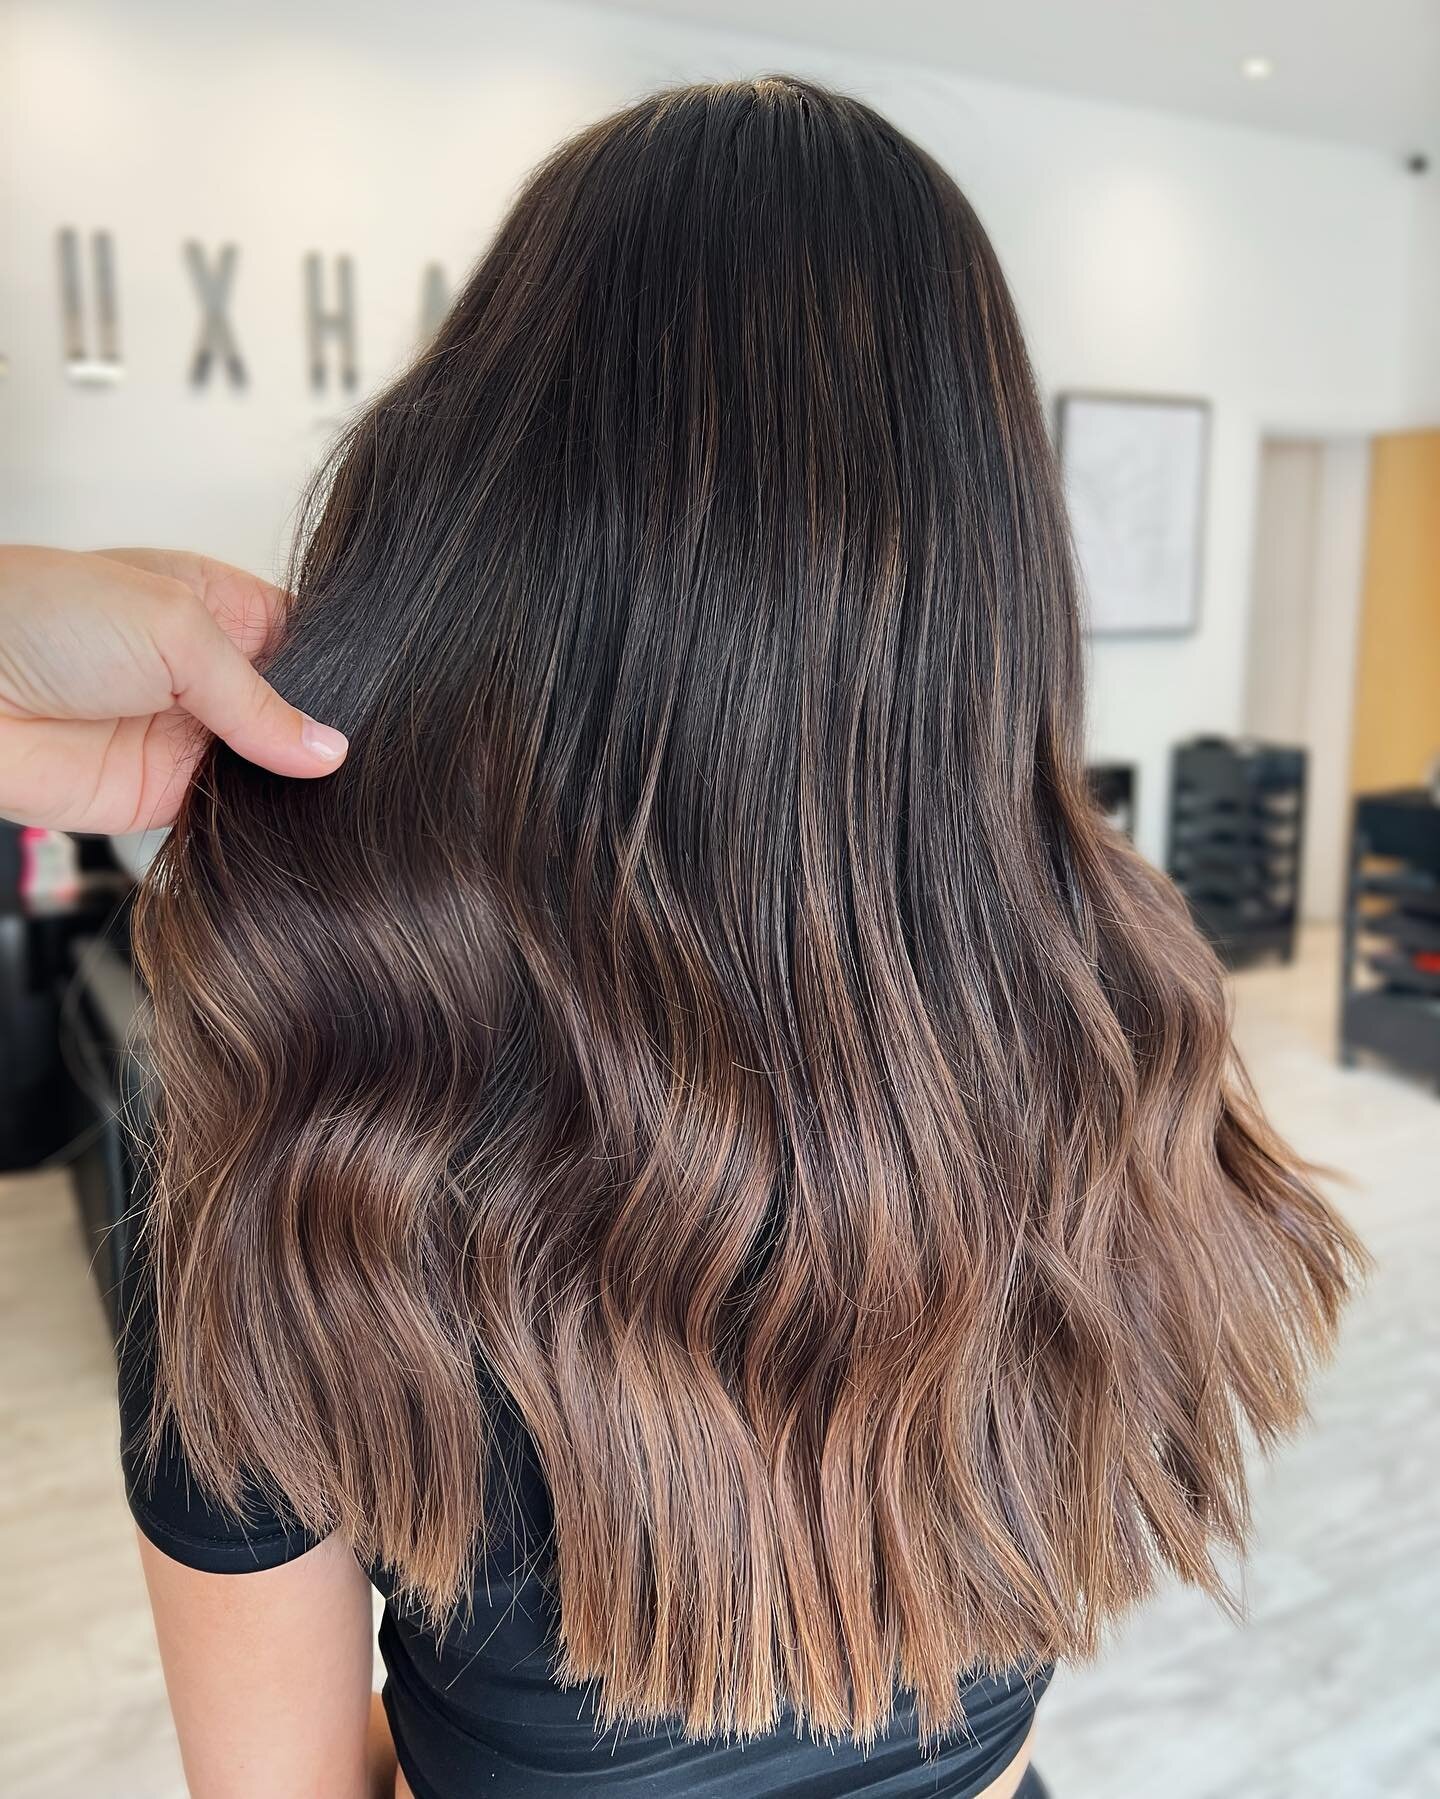 I promise you that photos do not do this colour justice, it was INSANE 🔥

A little service Breakdown:
Balayage Transformation
Toner
Cut, Blow Dry + Style
= &pound;270

Products + Colour Products | @keunehaircosmetics 
Styling Tools | @dysonhair @div